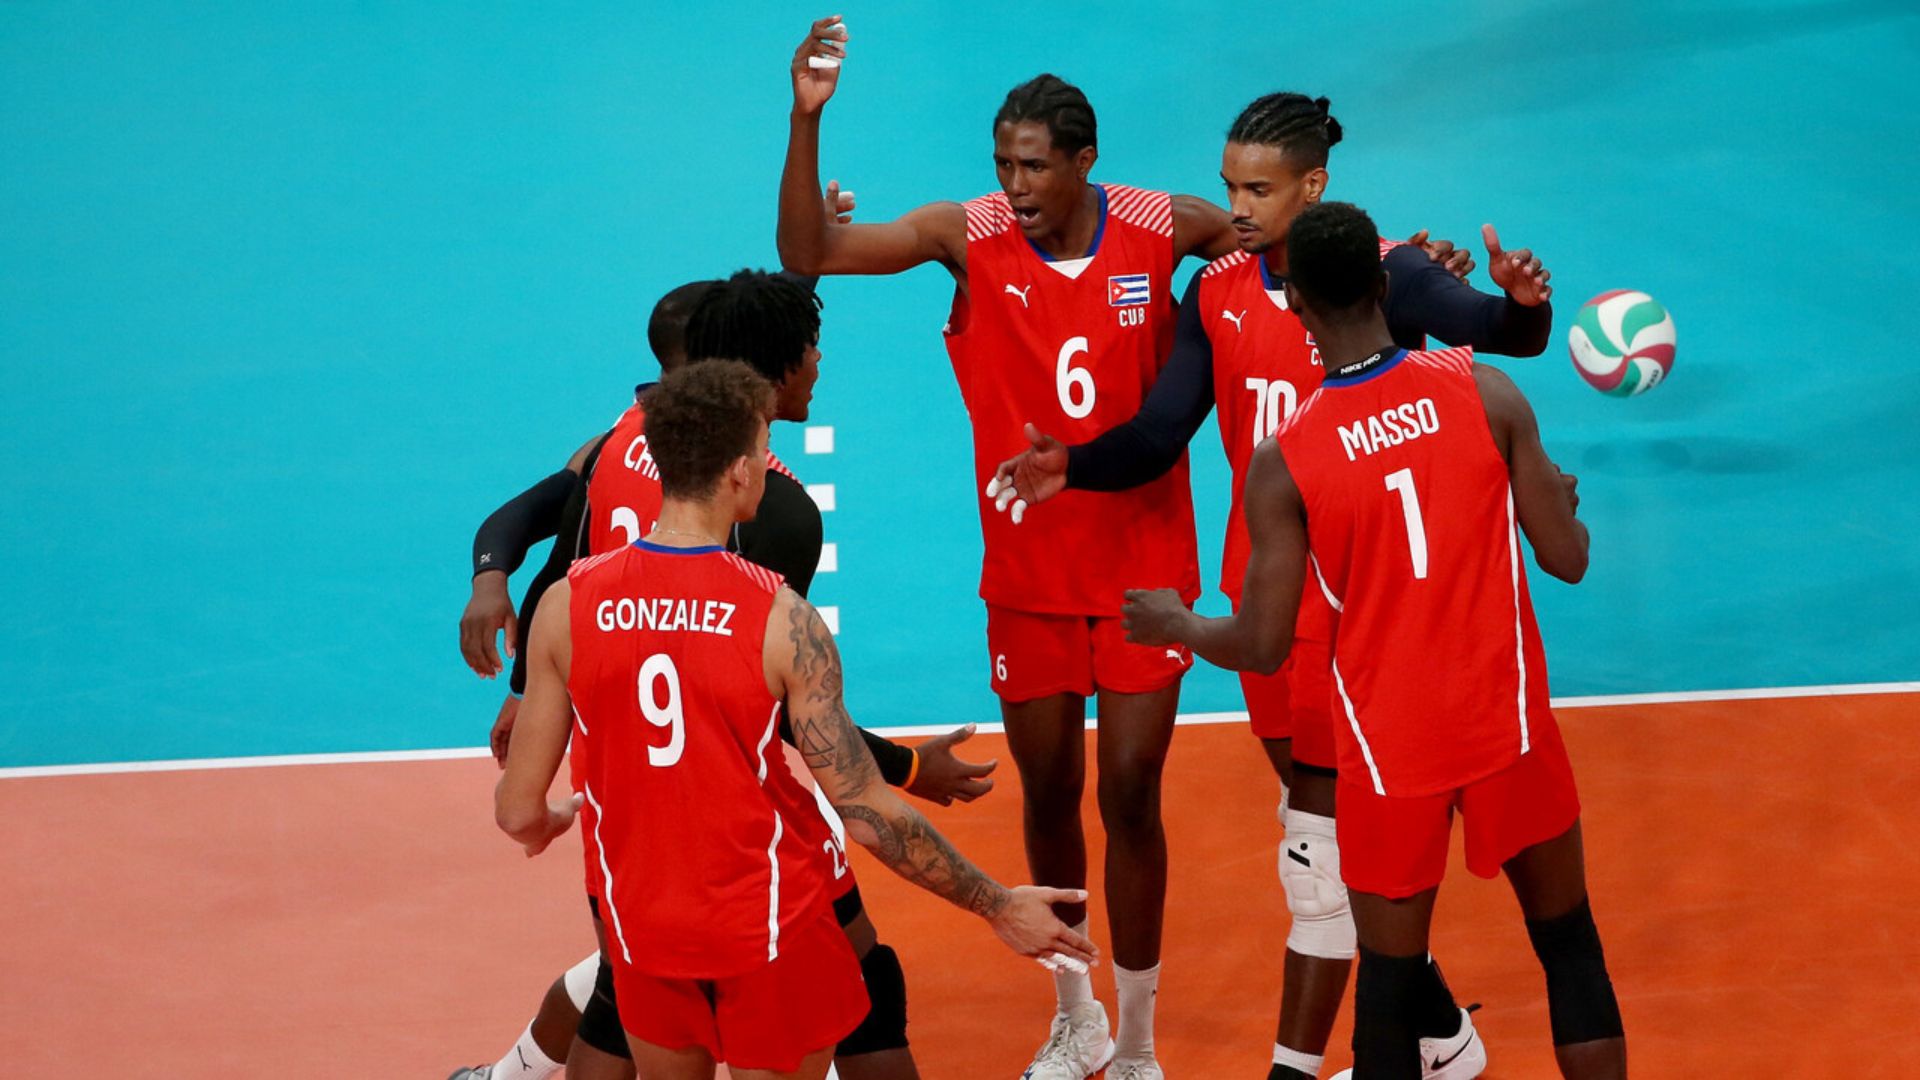 Cuba struggles to beat Puerto Rico, will contend for medals in male's volleyball